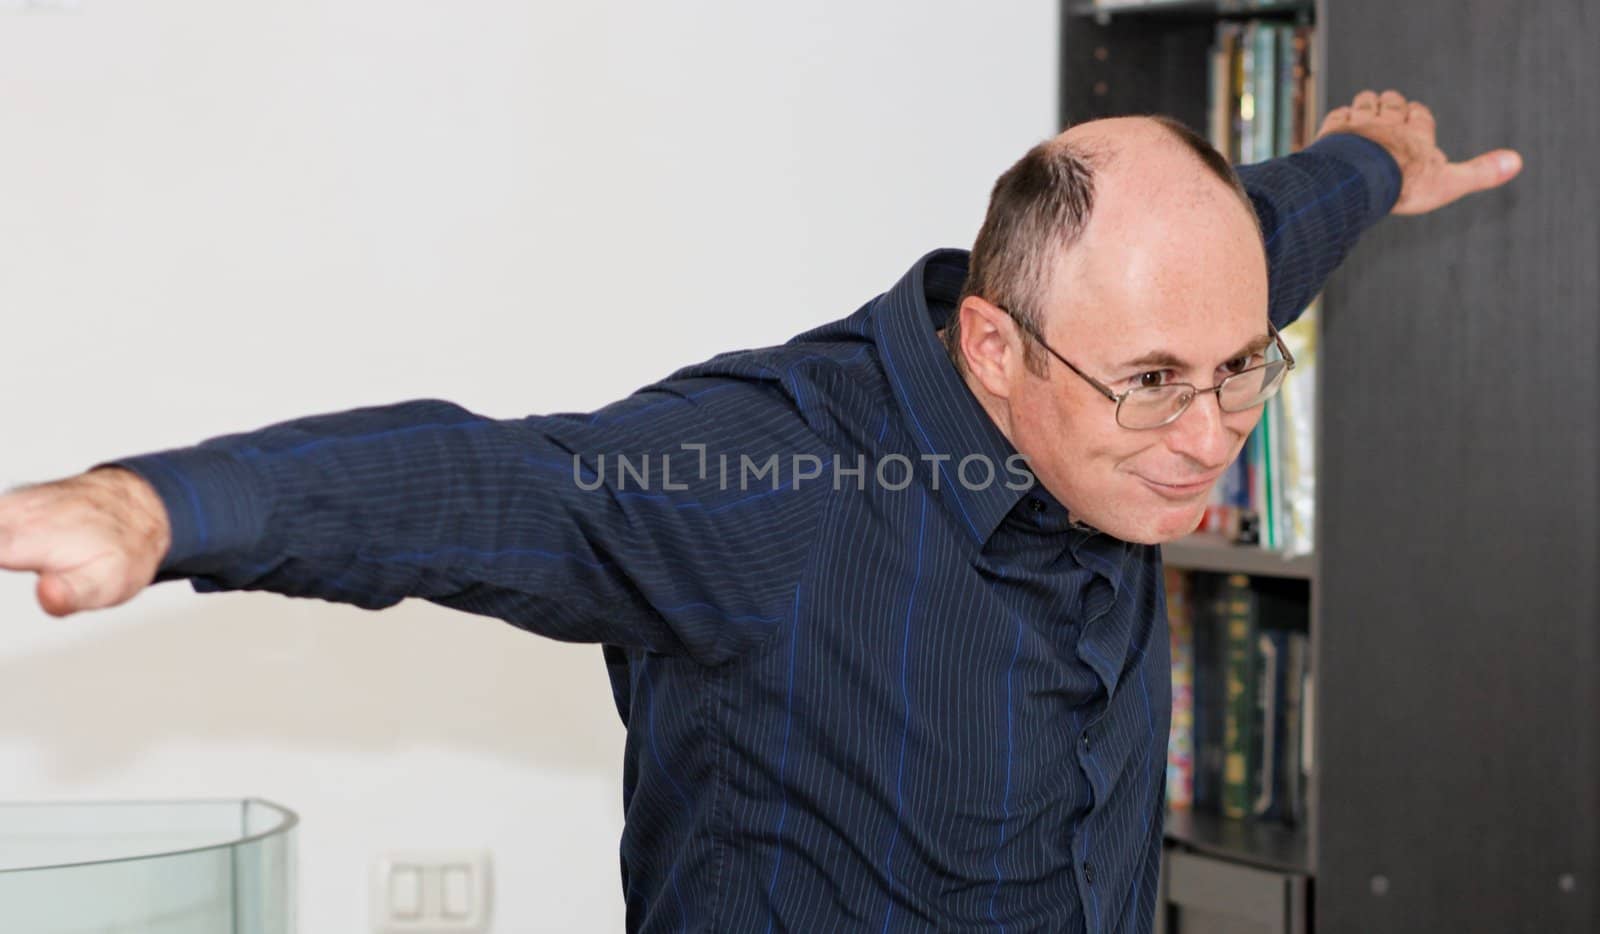 Bald man in glasses spreads his arms as if flying